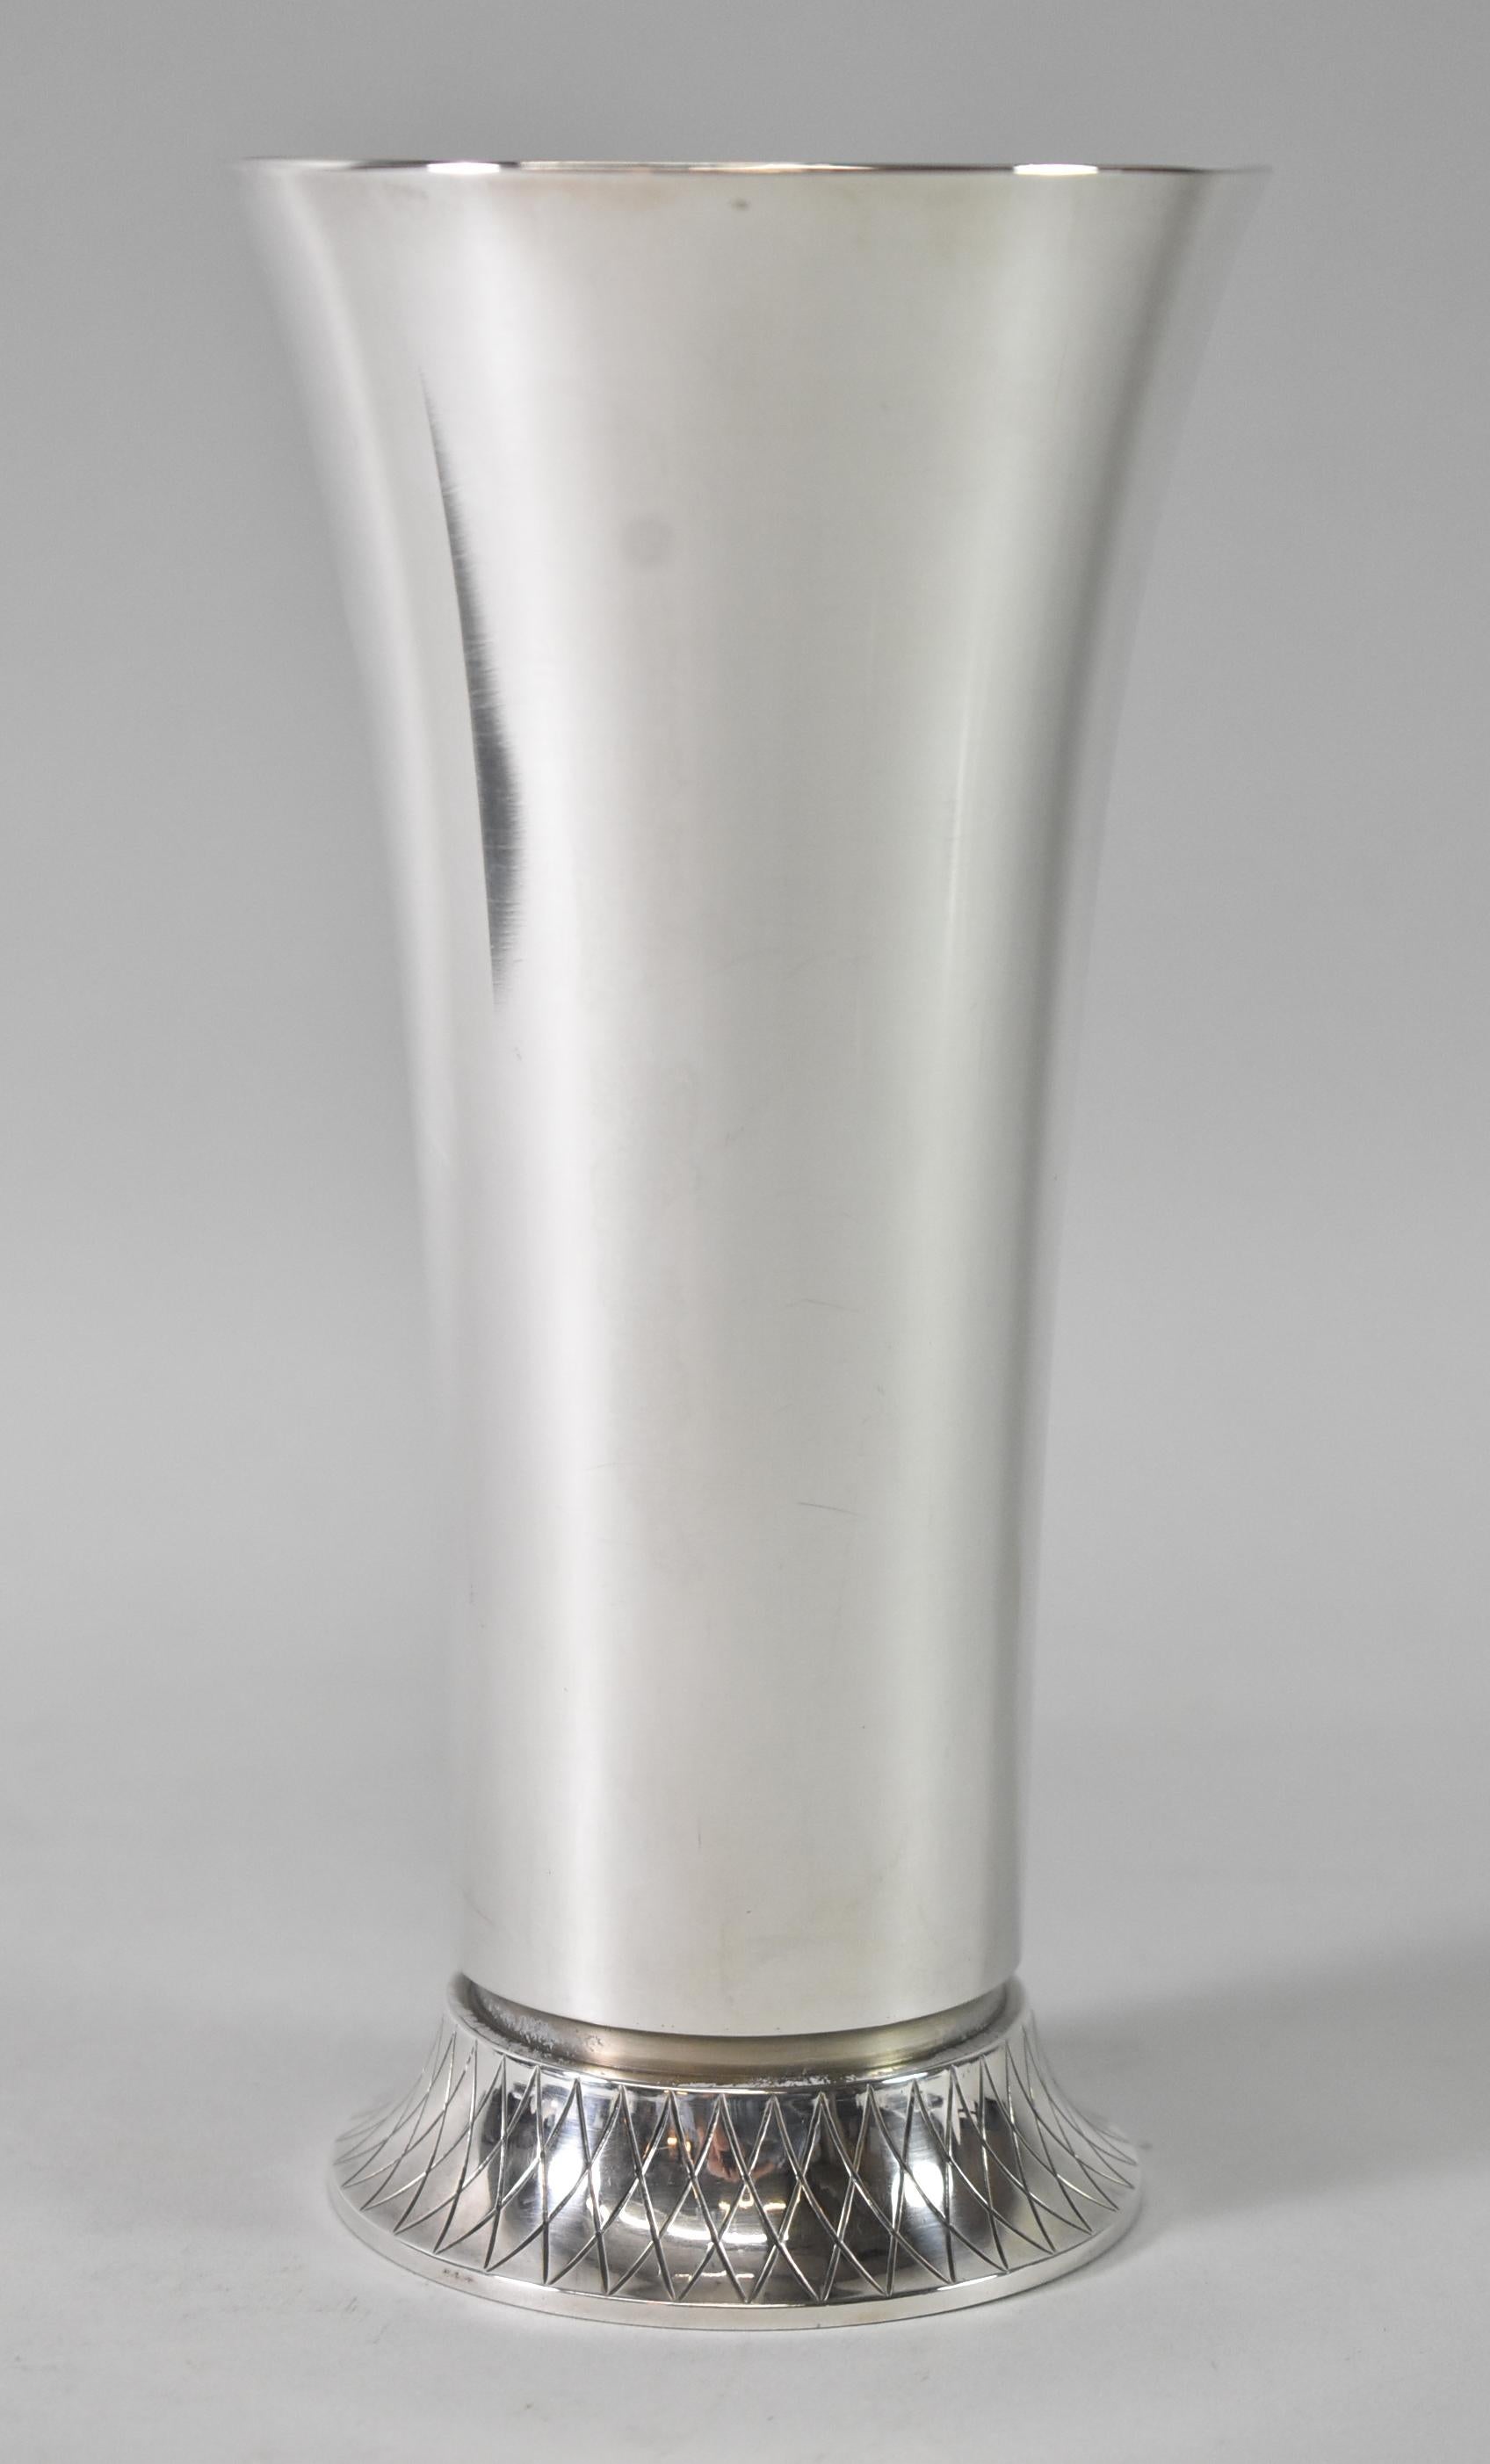 Beautiful sterling silver flare top vase no. 819C by Sigvard Bernadotte for Georg Jensen. Prince Sigvard of Sweden designed for Jensen from the late 1930's to mid-1940's. Hallmarks for Georg Jensen and Sigvard on the bottom. 7